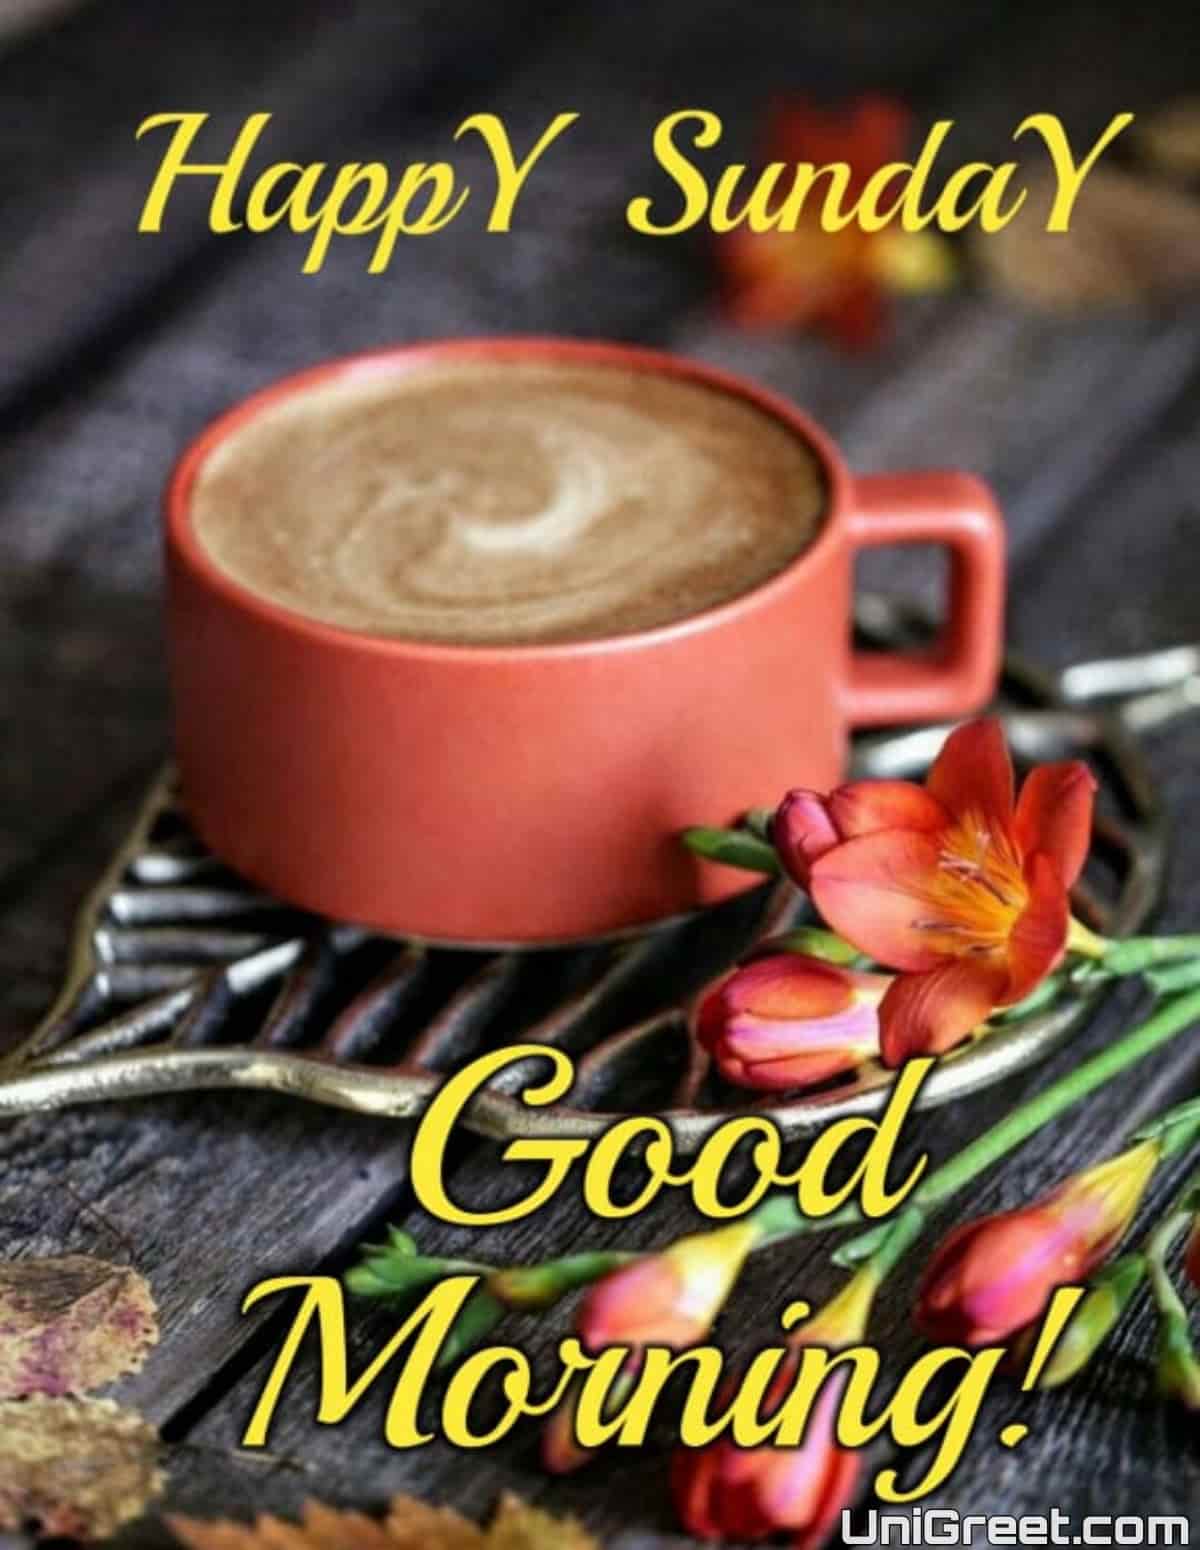 Collection of Over 999 High-Quality Good Morning Happy Sunday HD Images in Full 4K Resolution